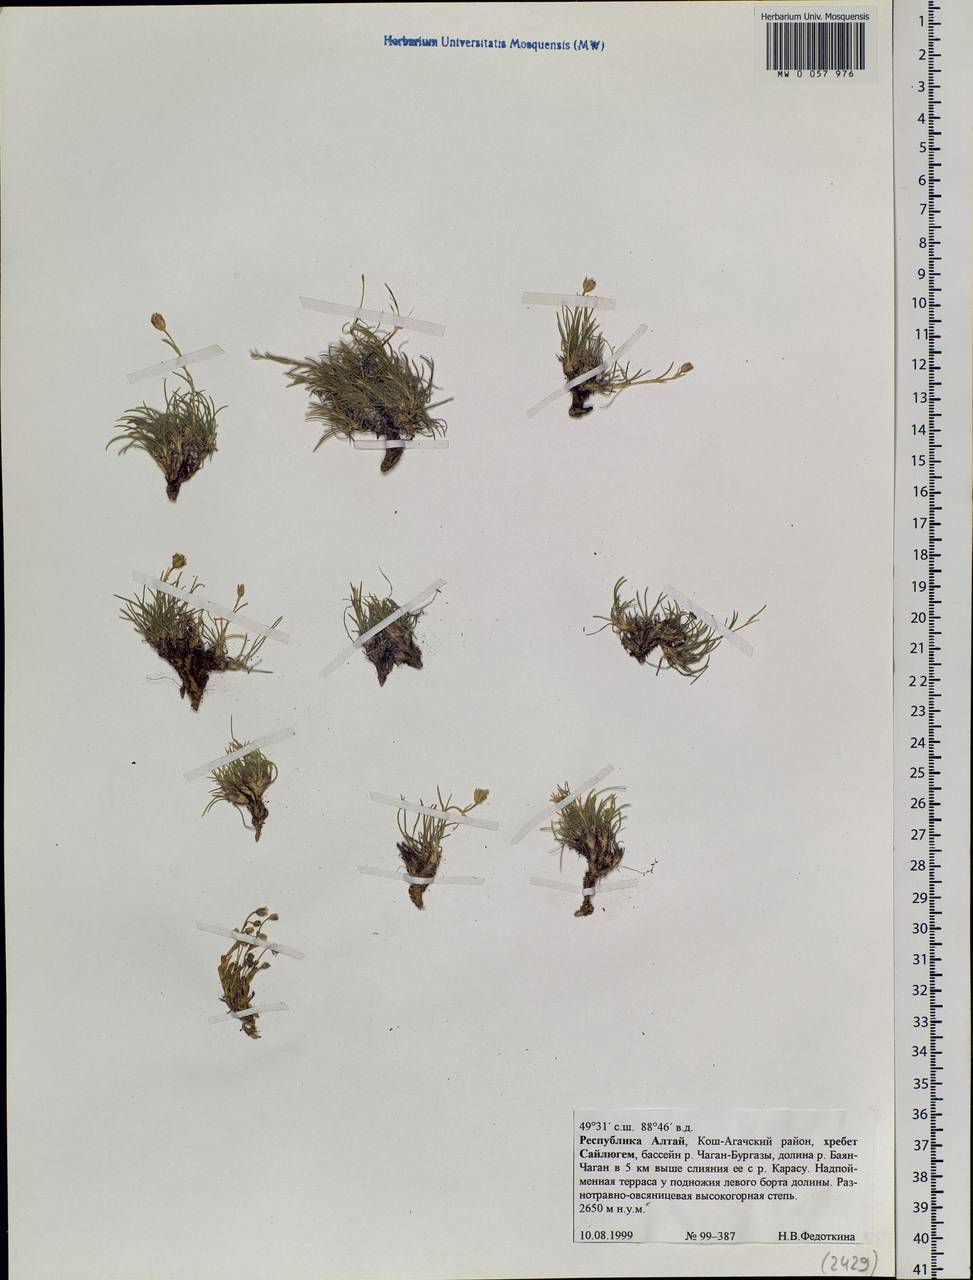 Caryophyllaceae, Siberia, Altai & Sayany Mountains (S2) (Russia)